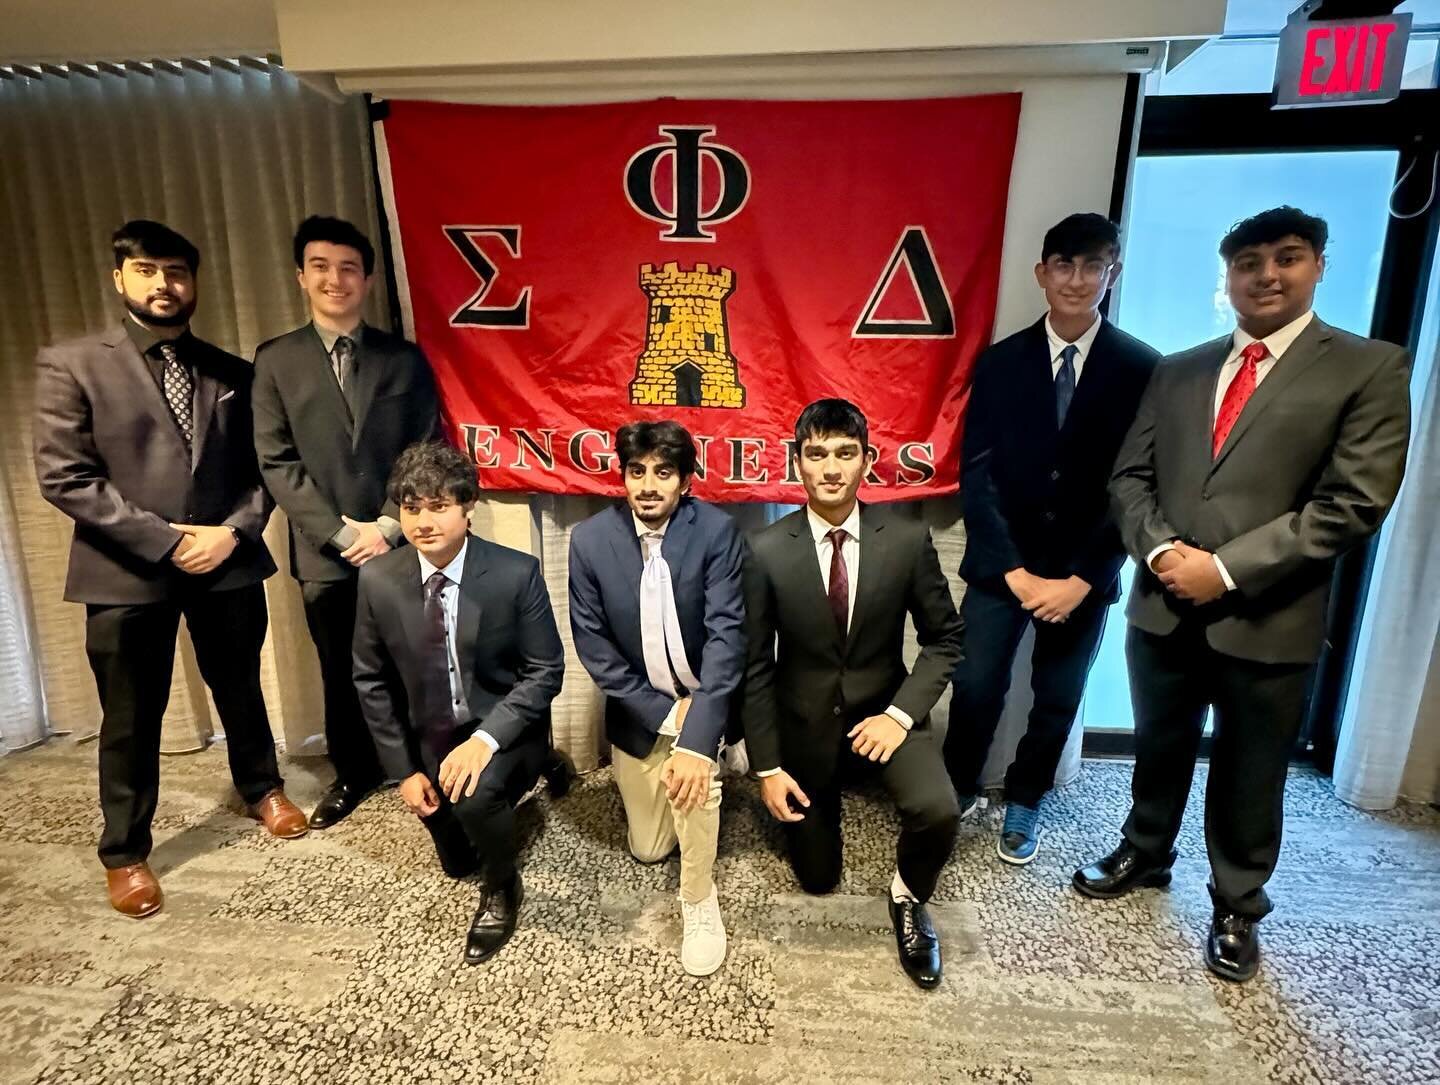 Introducing the new Omega Colony at Rutgers University! We are excited for the new generation of this important part of Sigma Phi Delta.